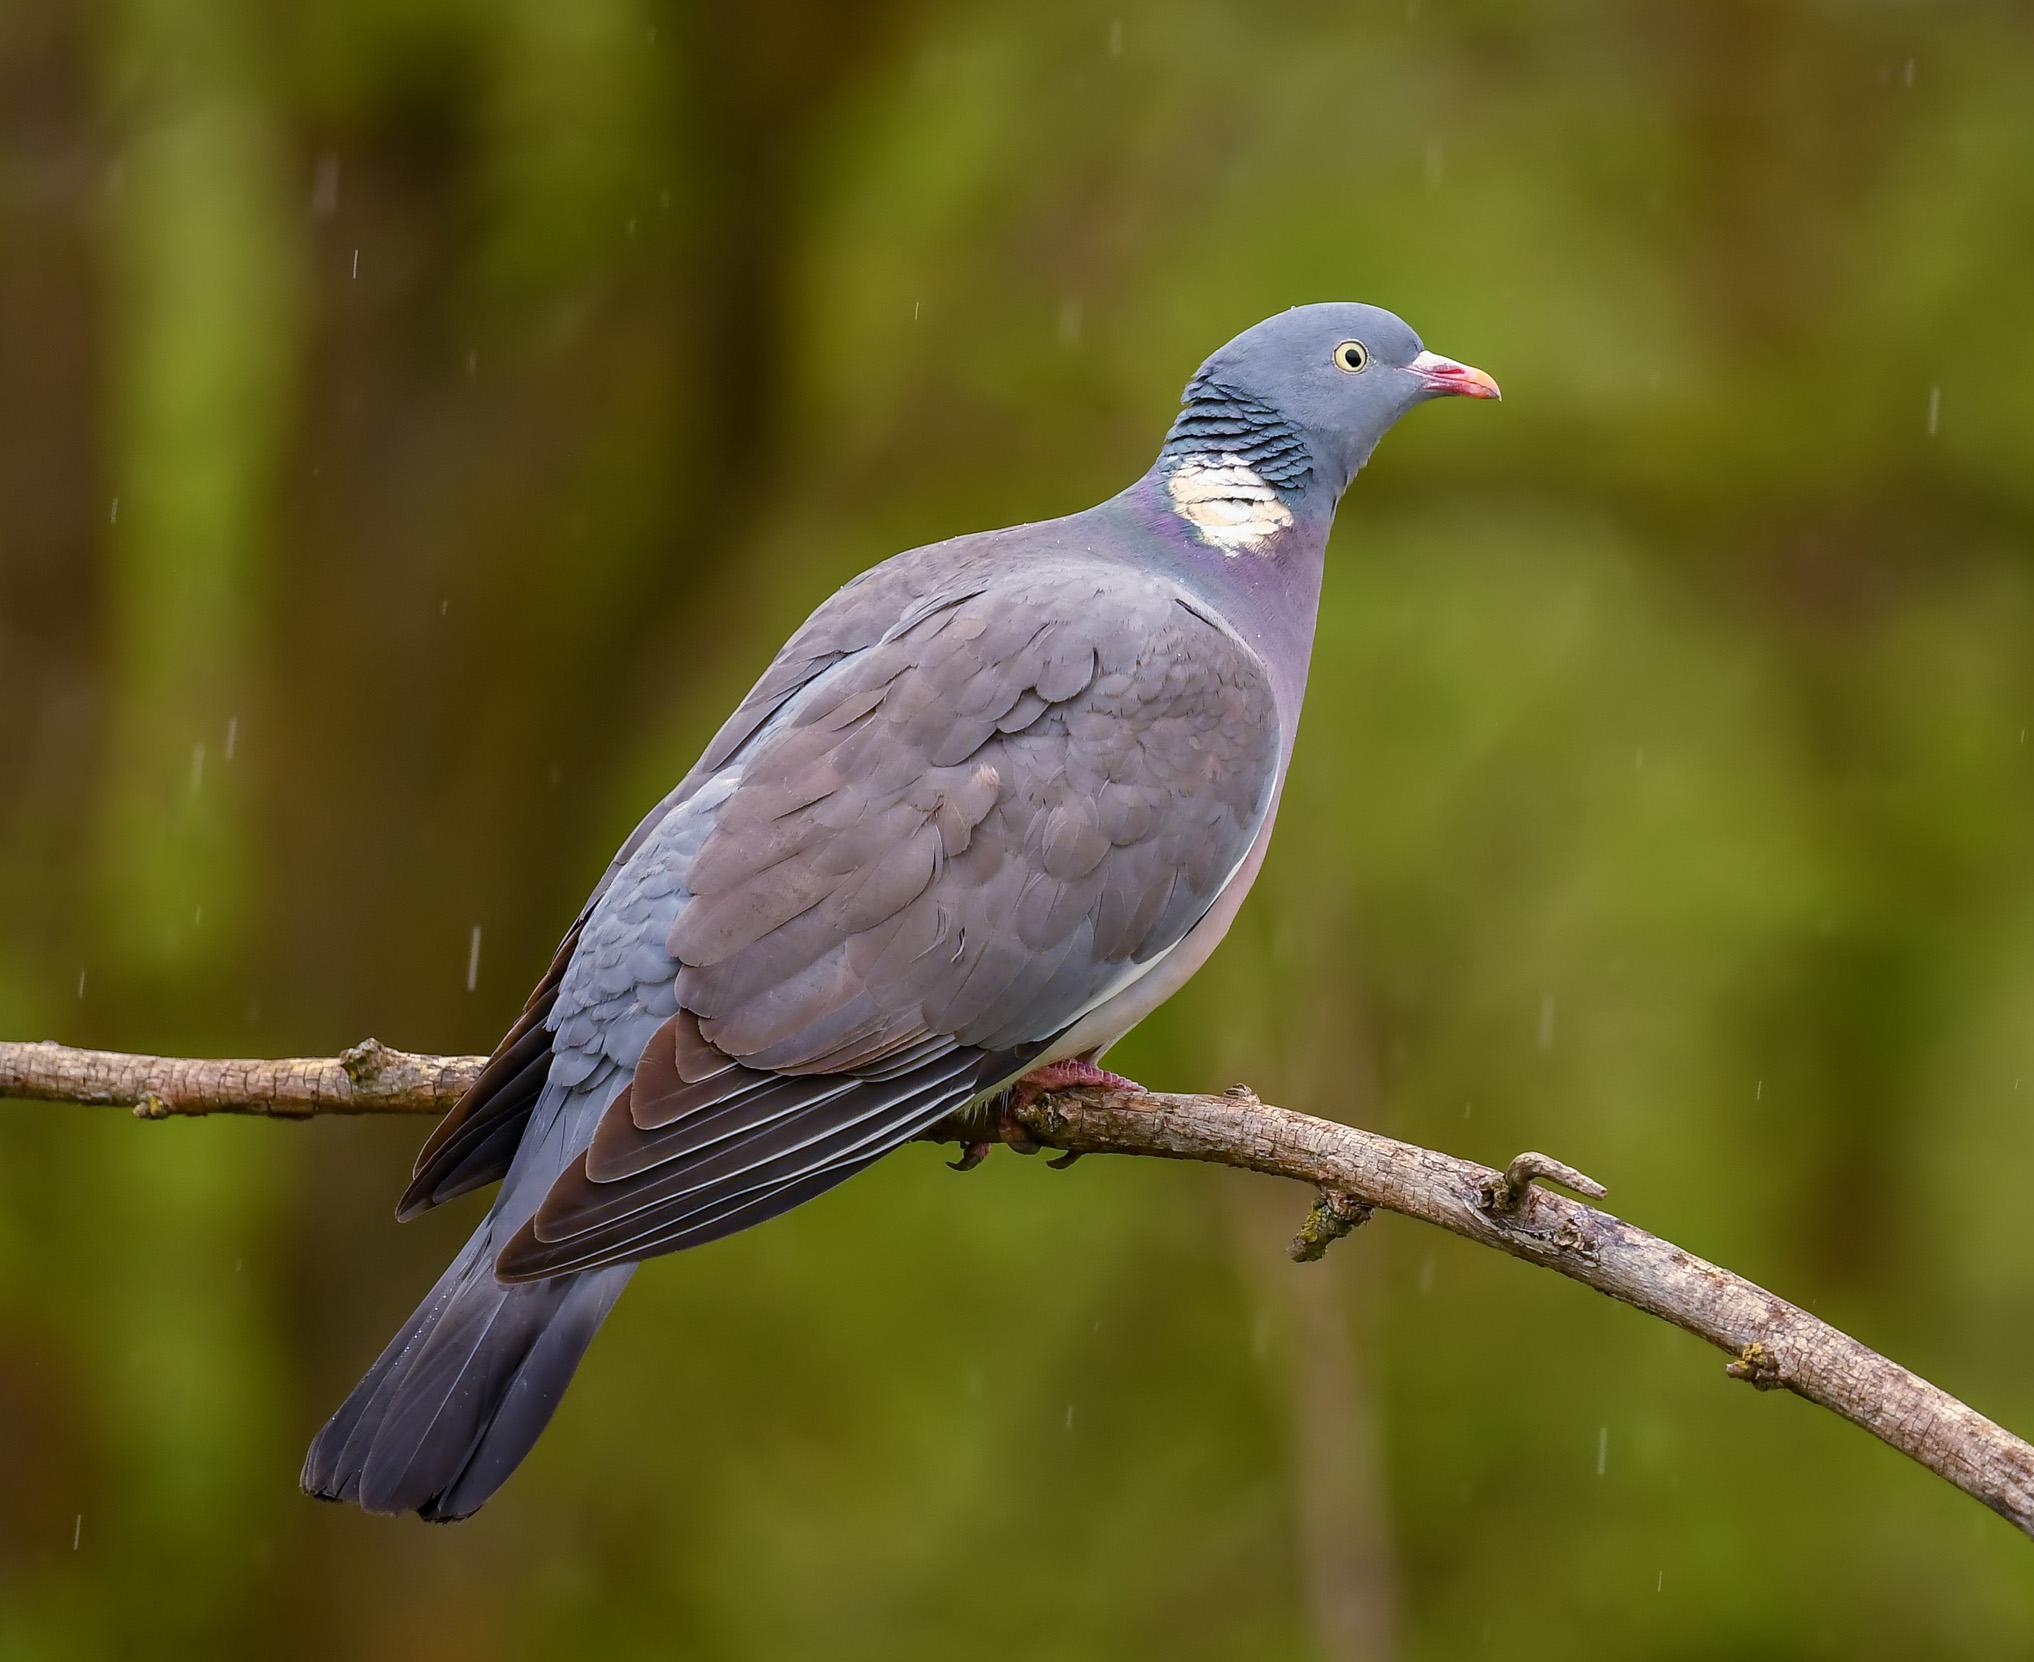 A lone Woodpigeon perched on a branch in the rain.